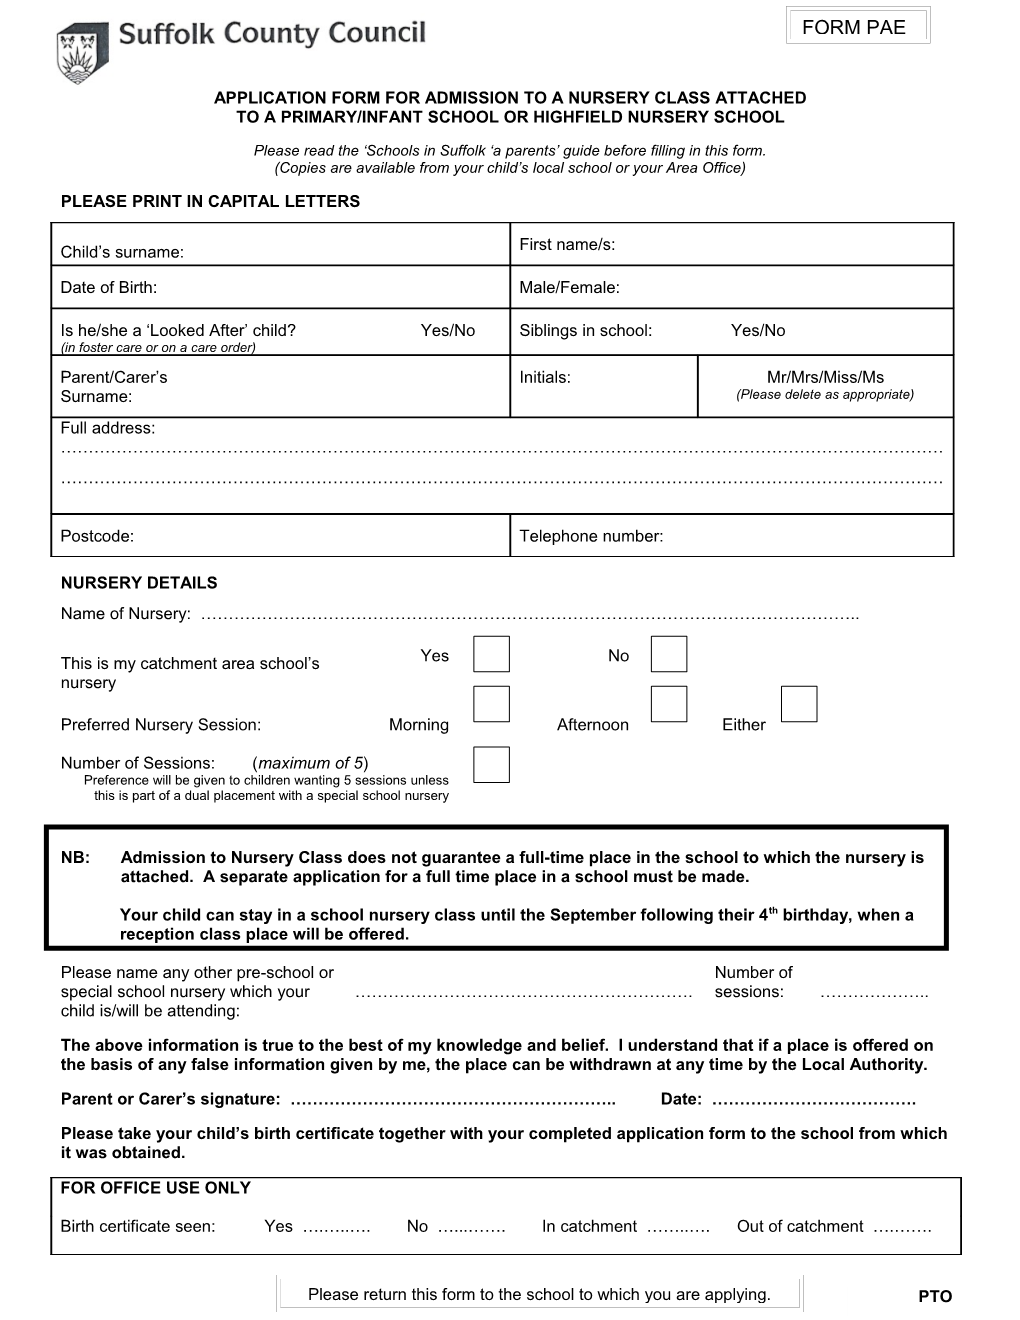 Application Form for Admission to a Nursery Class Attached